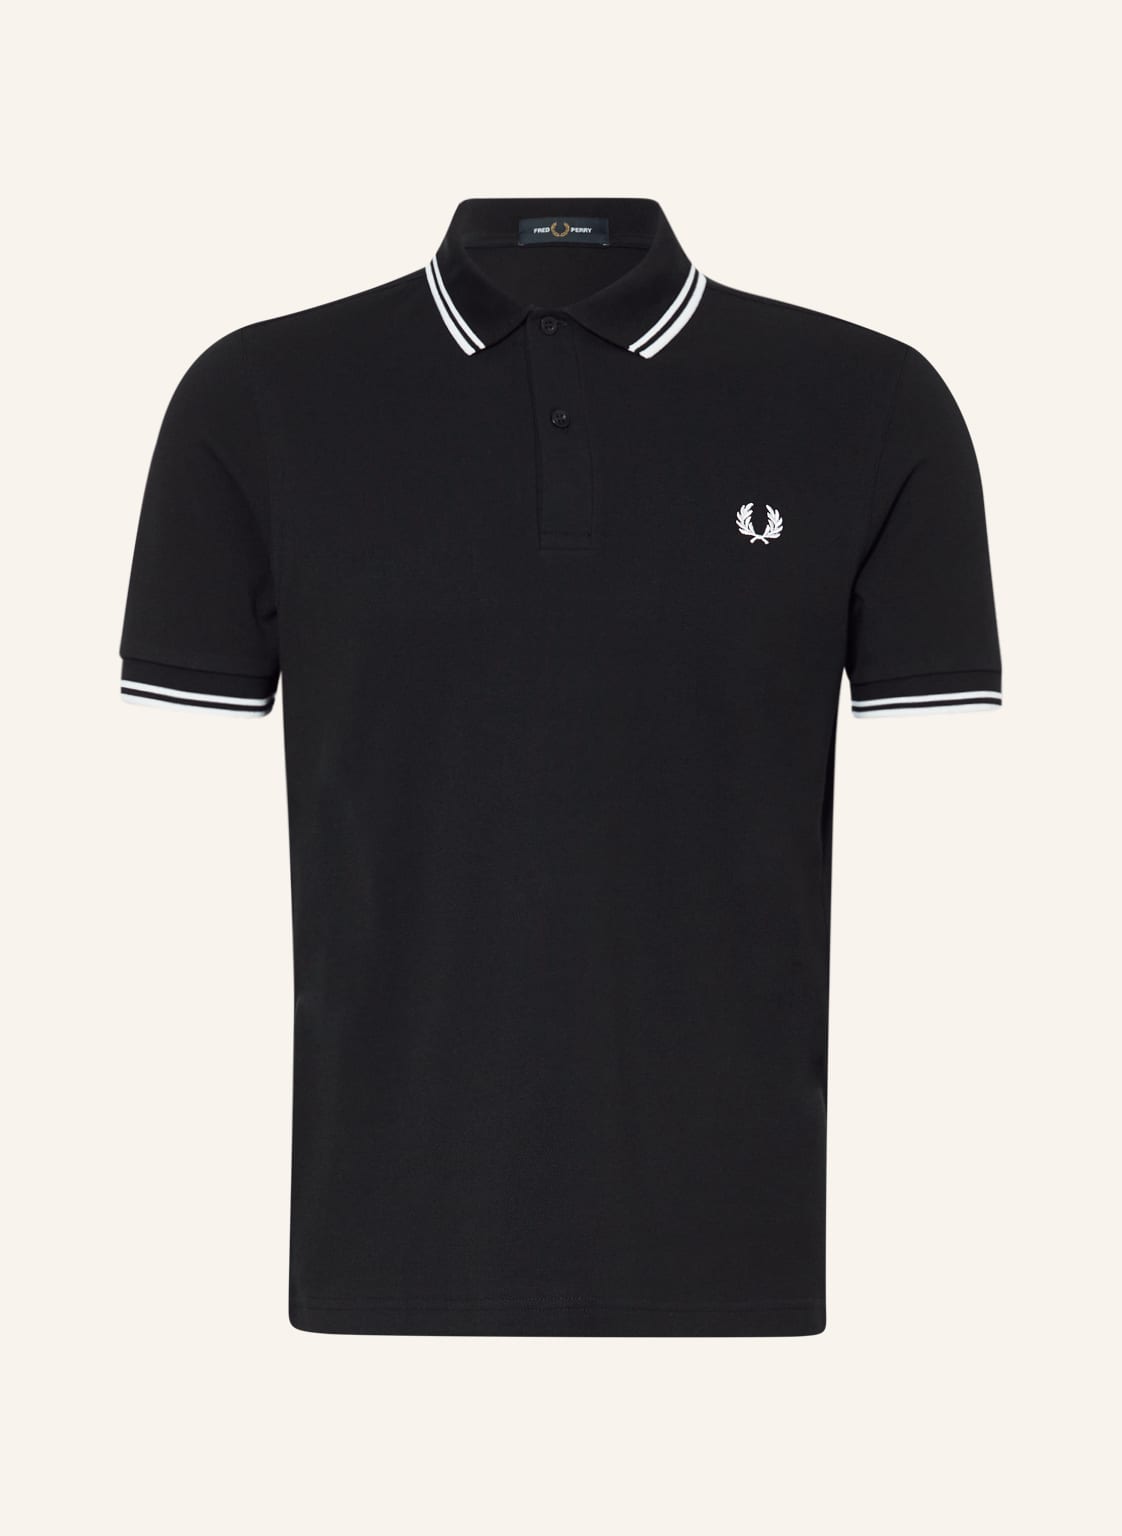 Fred Perry Piqué-Poloshirt m3600 Straight Fit blau von Fred Perry